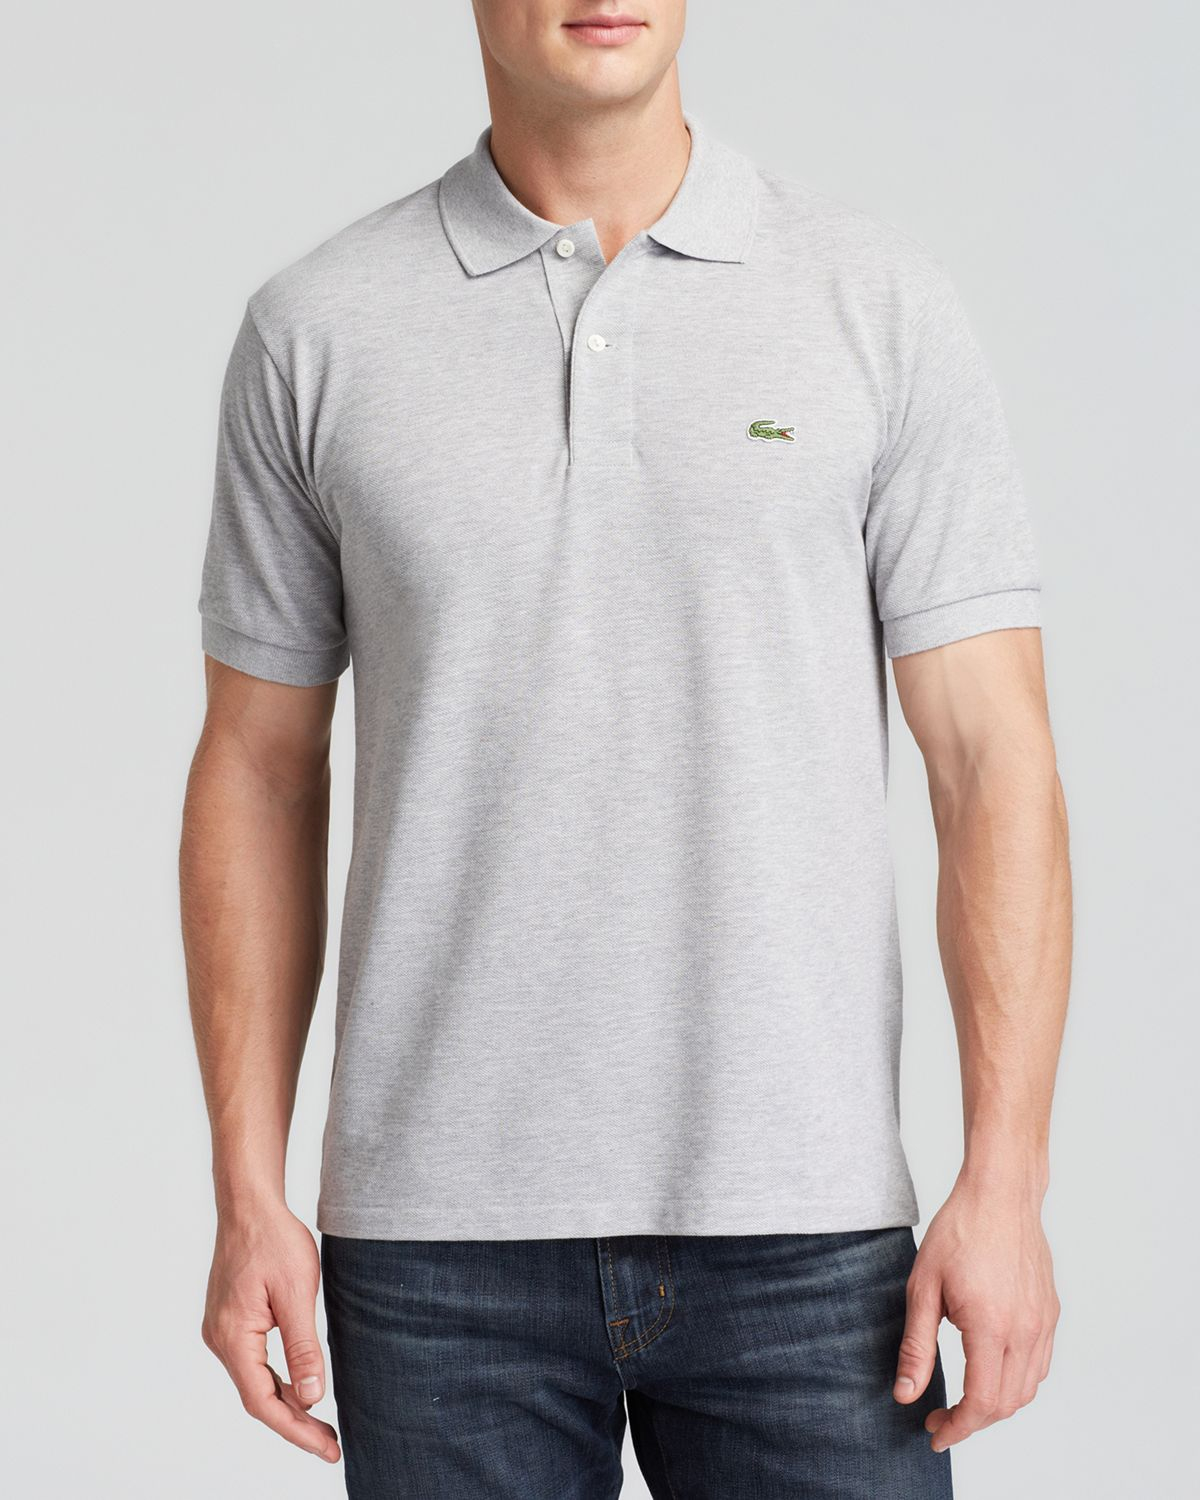 Lacoste Short Sleeve Piqué Polo Shirt - Classic Fit in Gray for Men ...